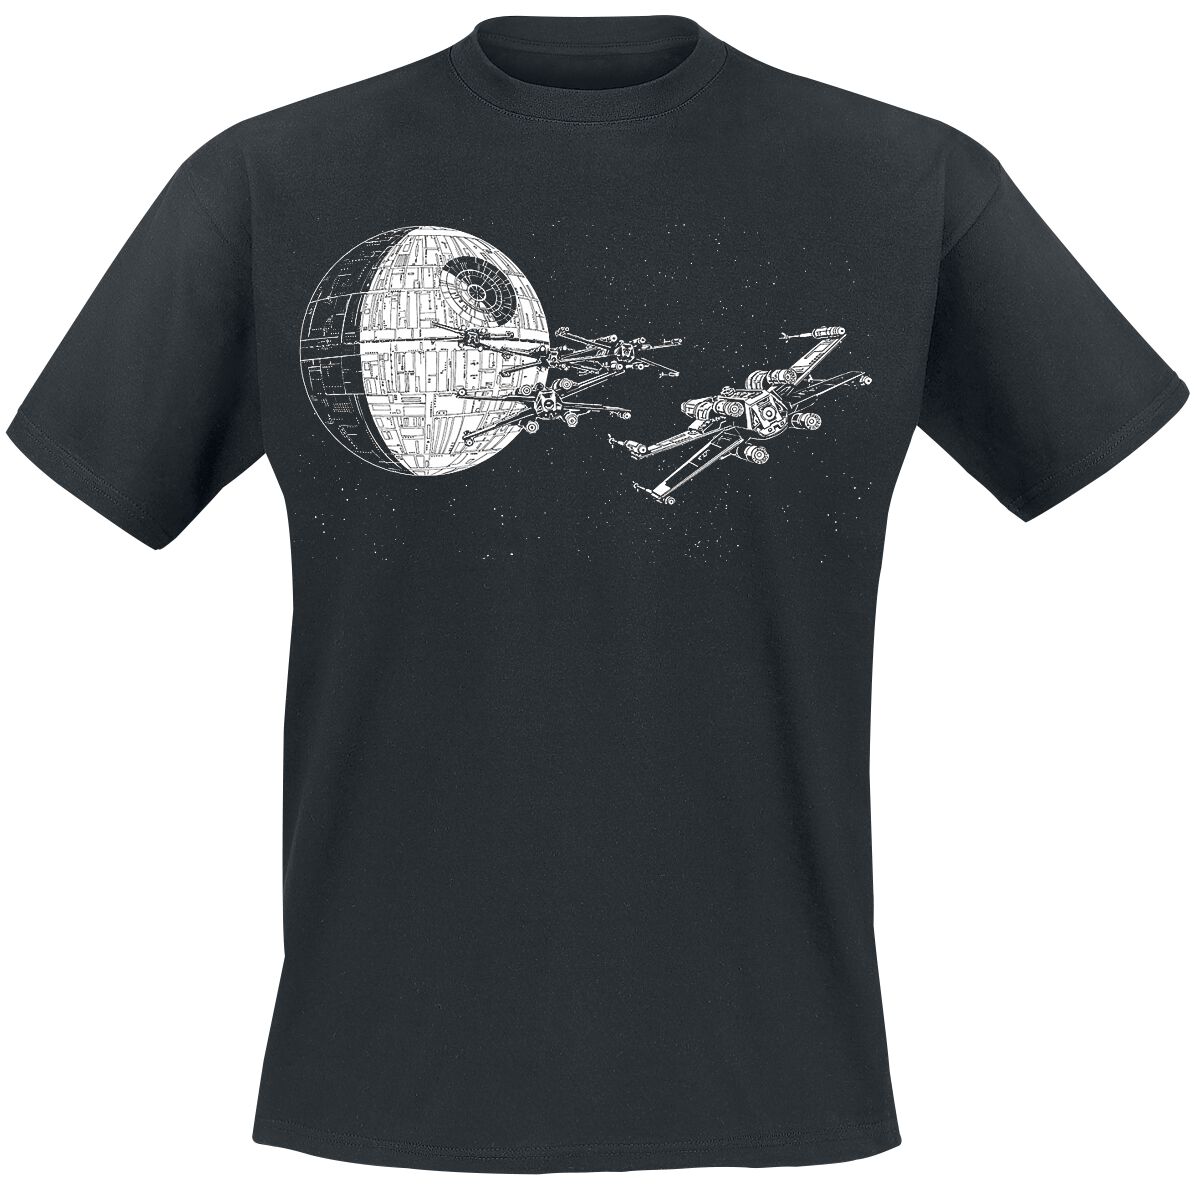 Star Wars Episode 4 - A New Hope - Attack on the Deathstar T-Shirt black